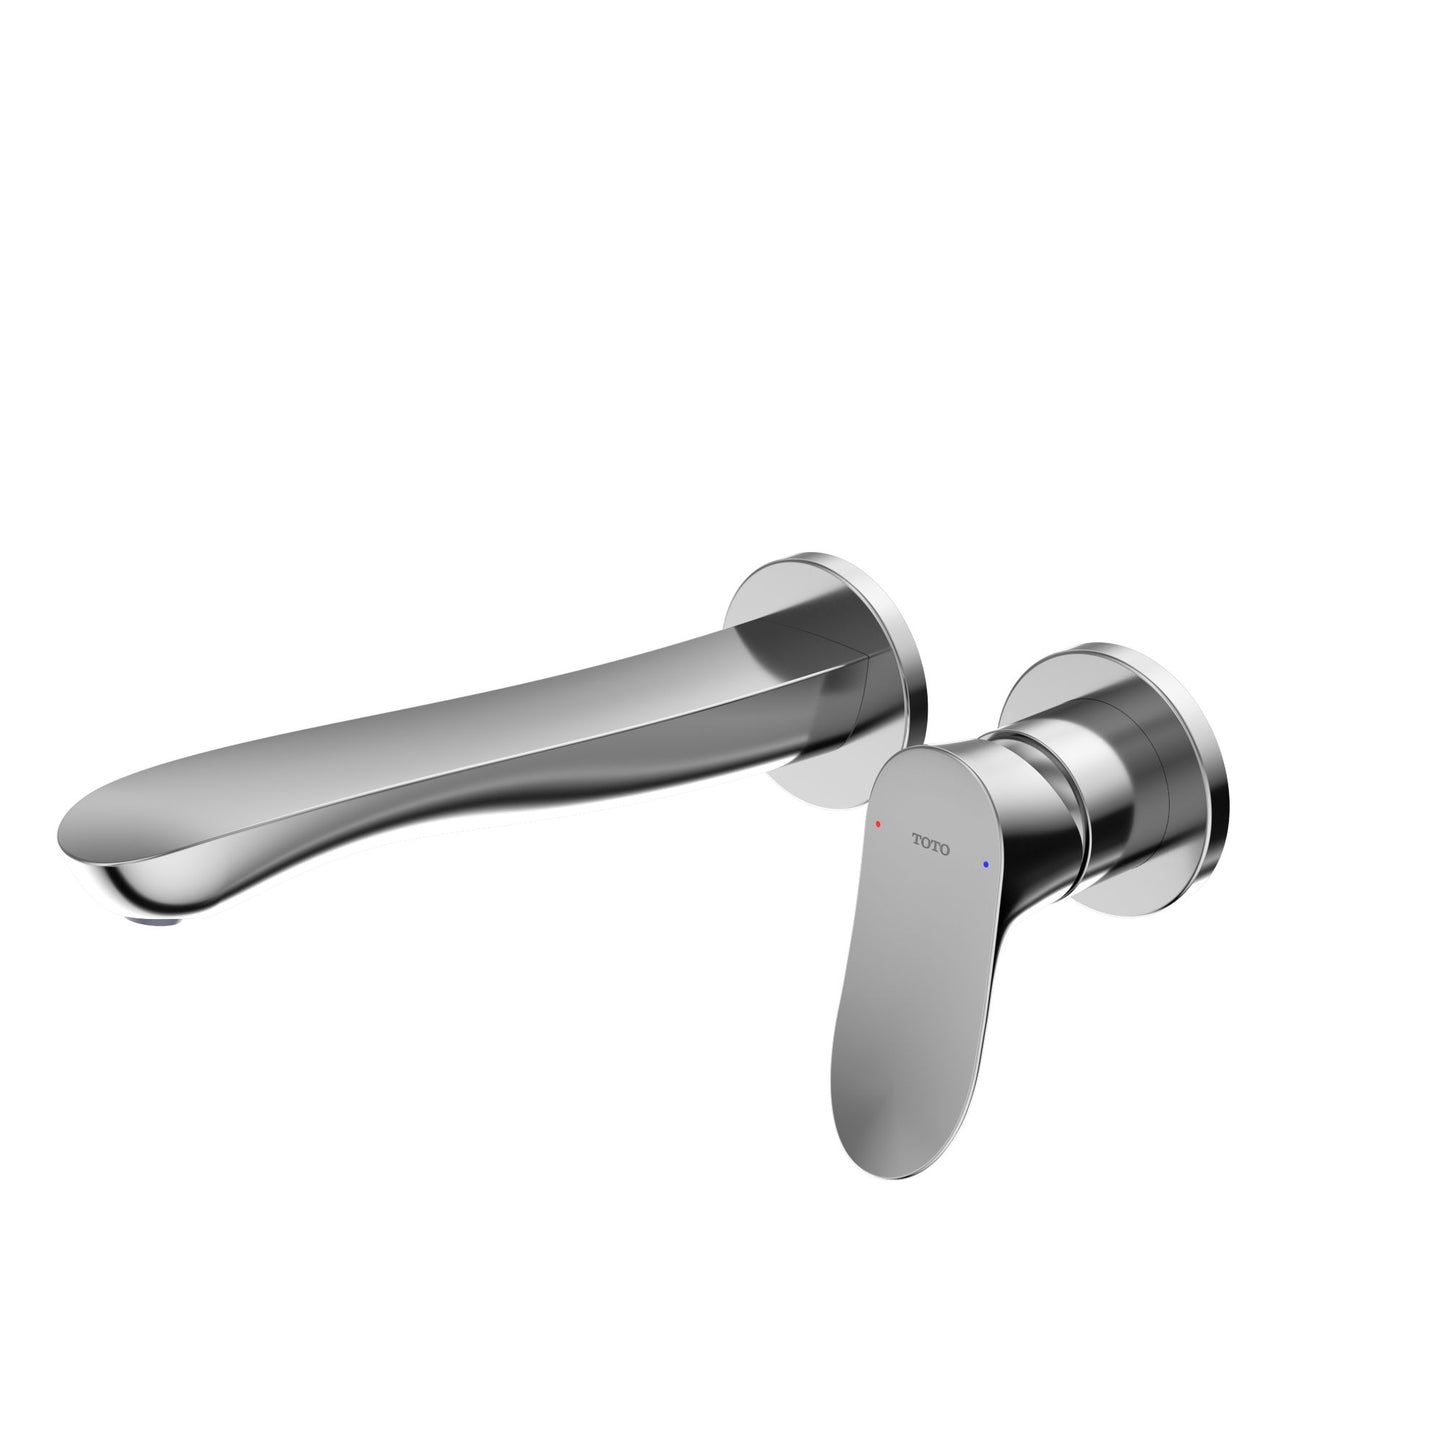 TOTO® GO 1.2 GPM Wall-Mount Single-Handle L Bathroom Faucet with COMFORT GLIDE™ Technology, Polished Chrome - TLG01311UA#CP